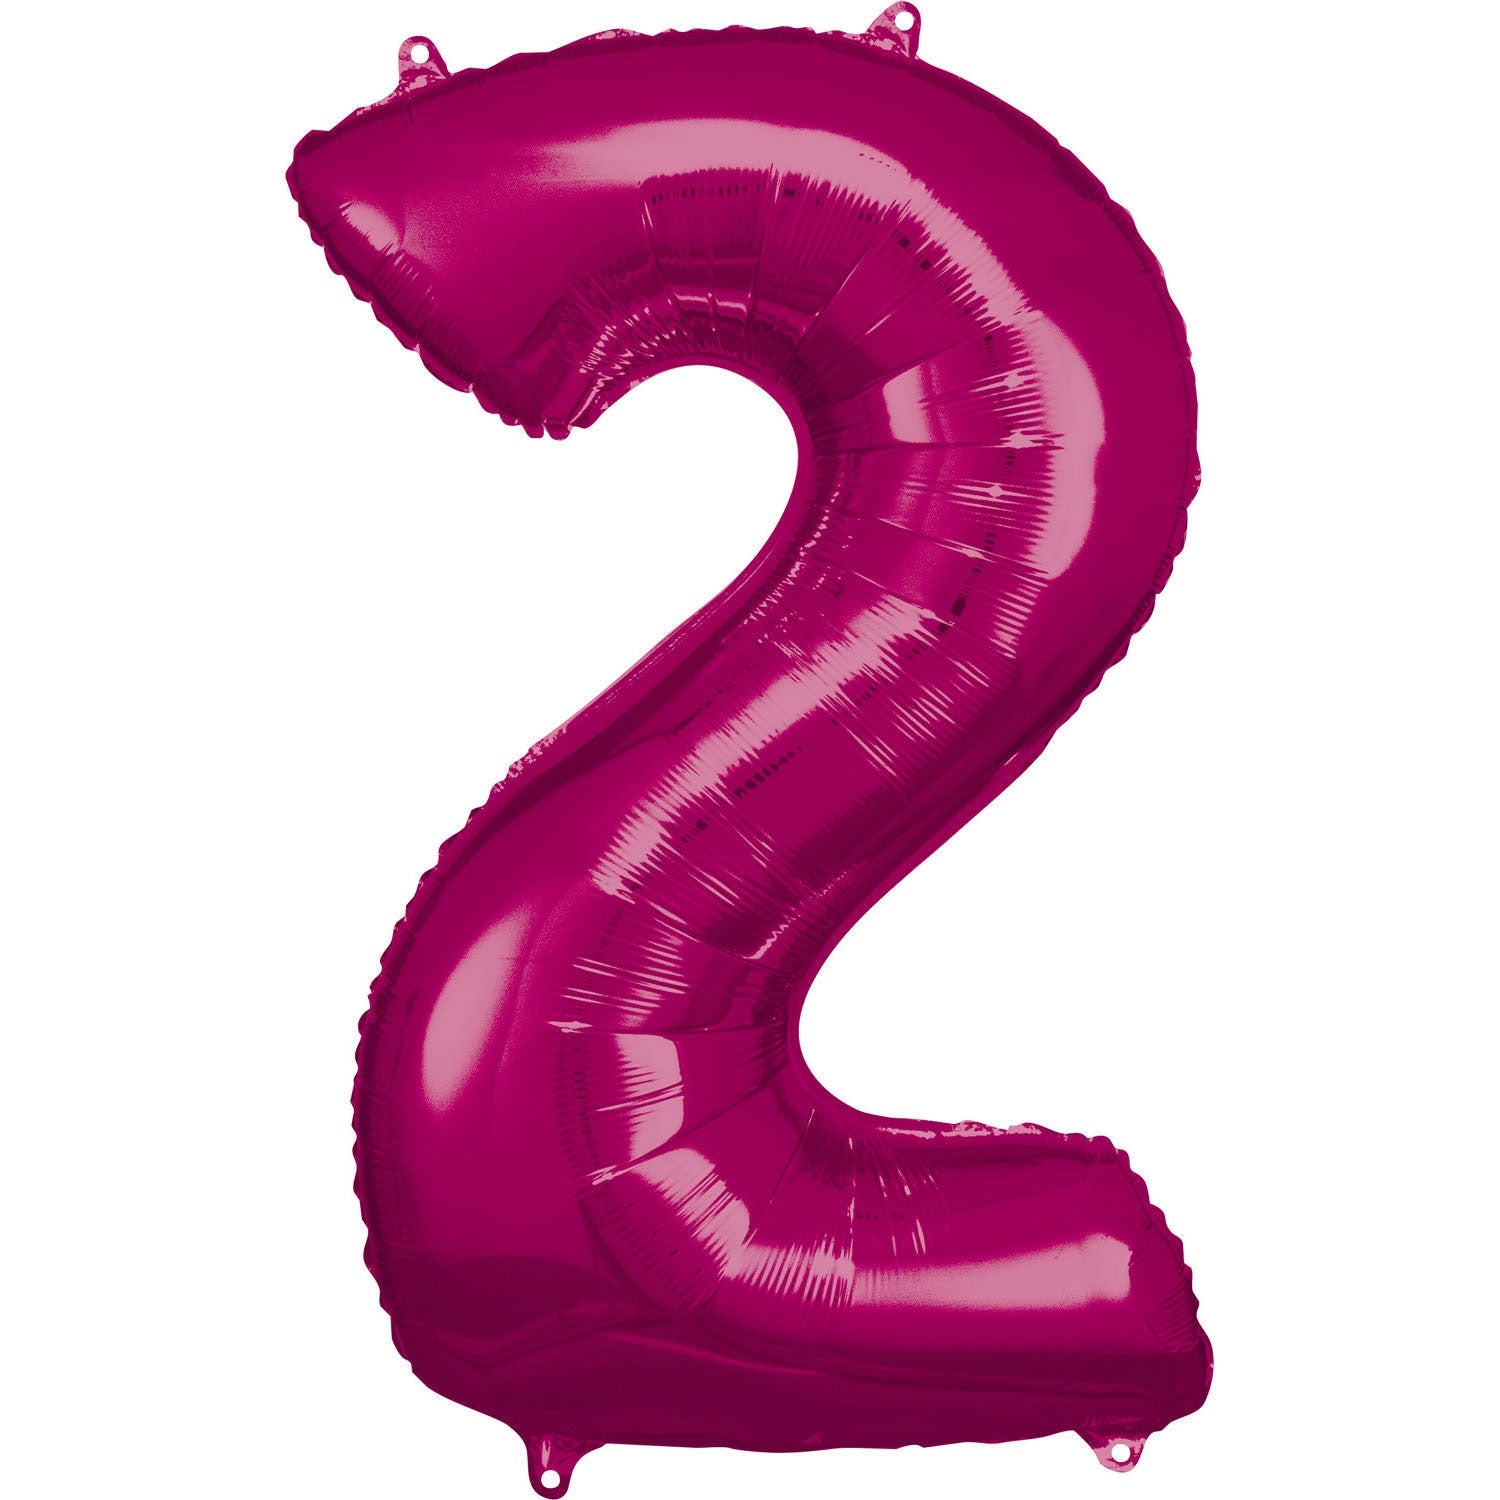 Pink Supershape Number 2 Foil Balloon 88cm (34in) height by 50cm (19in) width Balloon is sold uninflated. Can be inflated with air or helium.